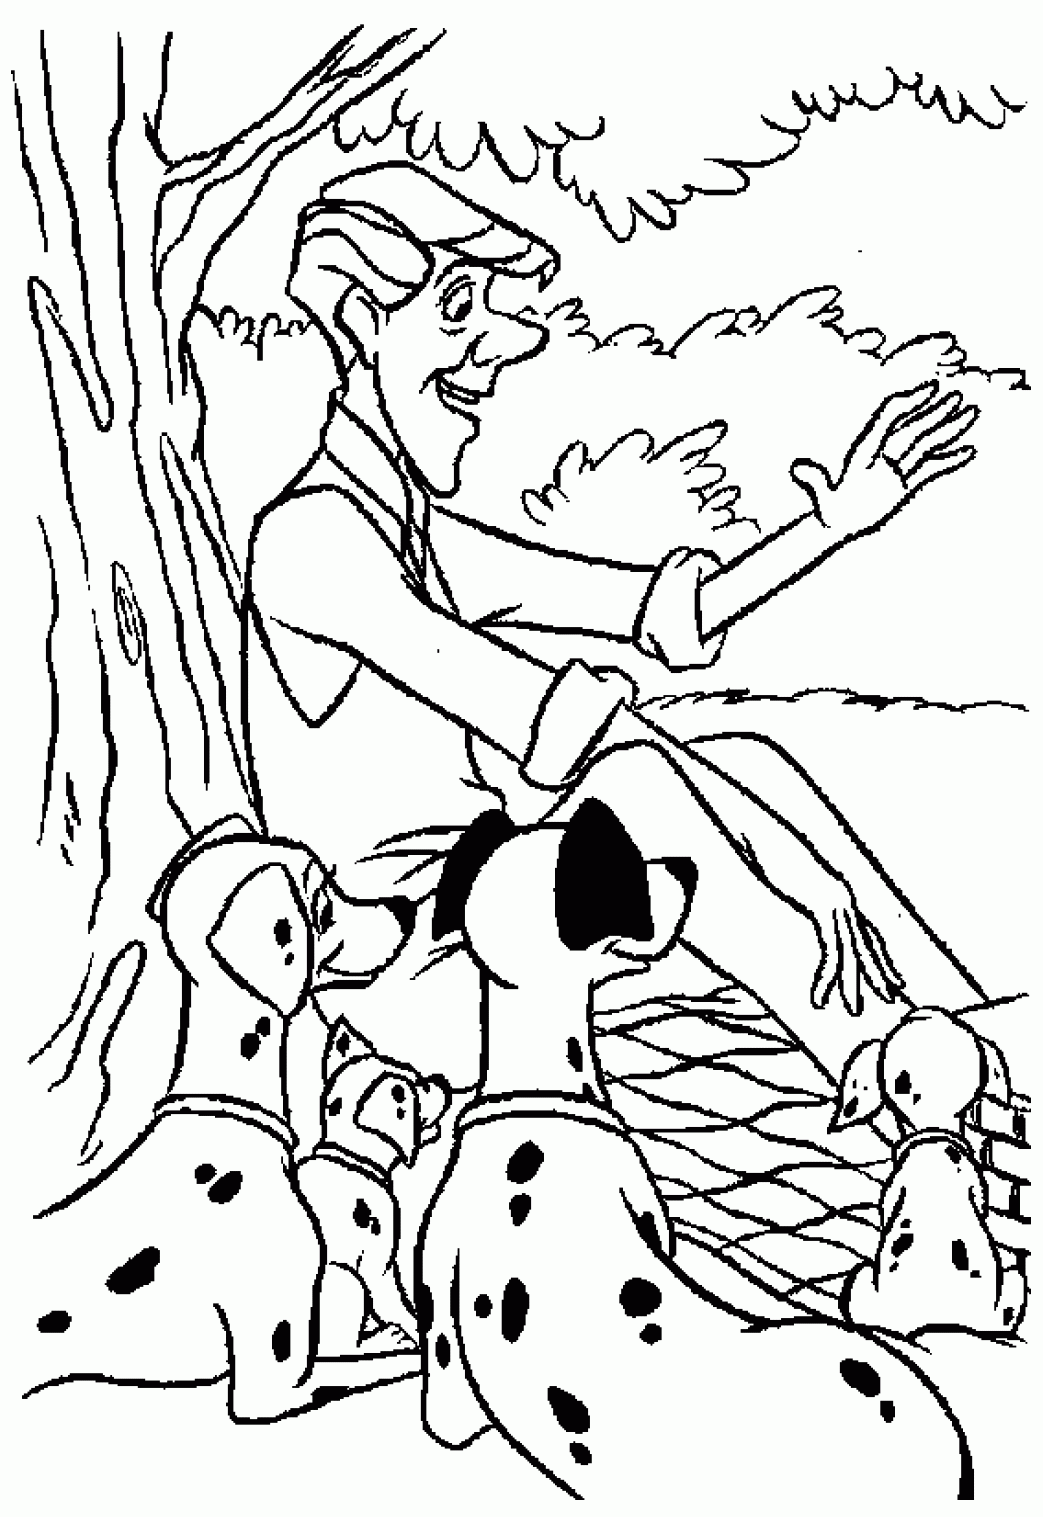 101-dalmatians-to-download-for-free - 101 Dalmatians Kids Coloring Pages